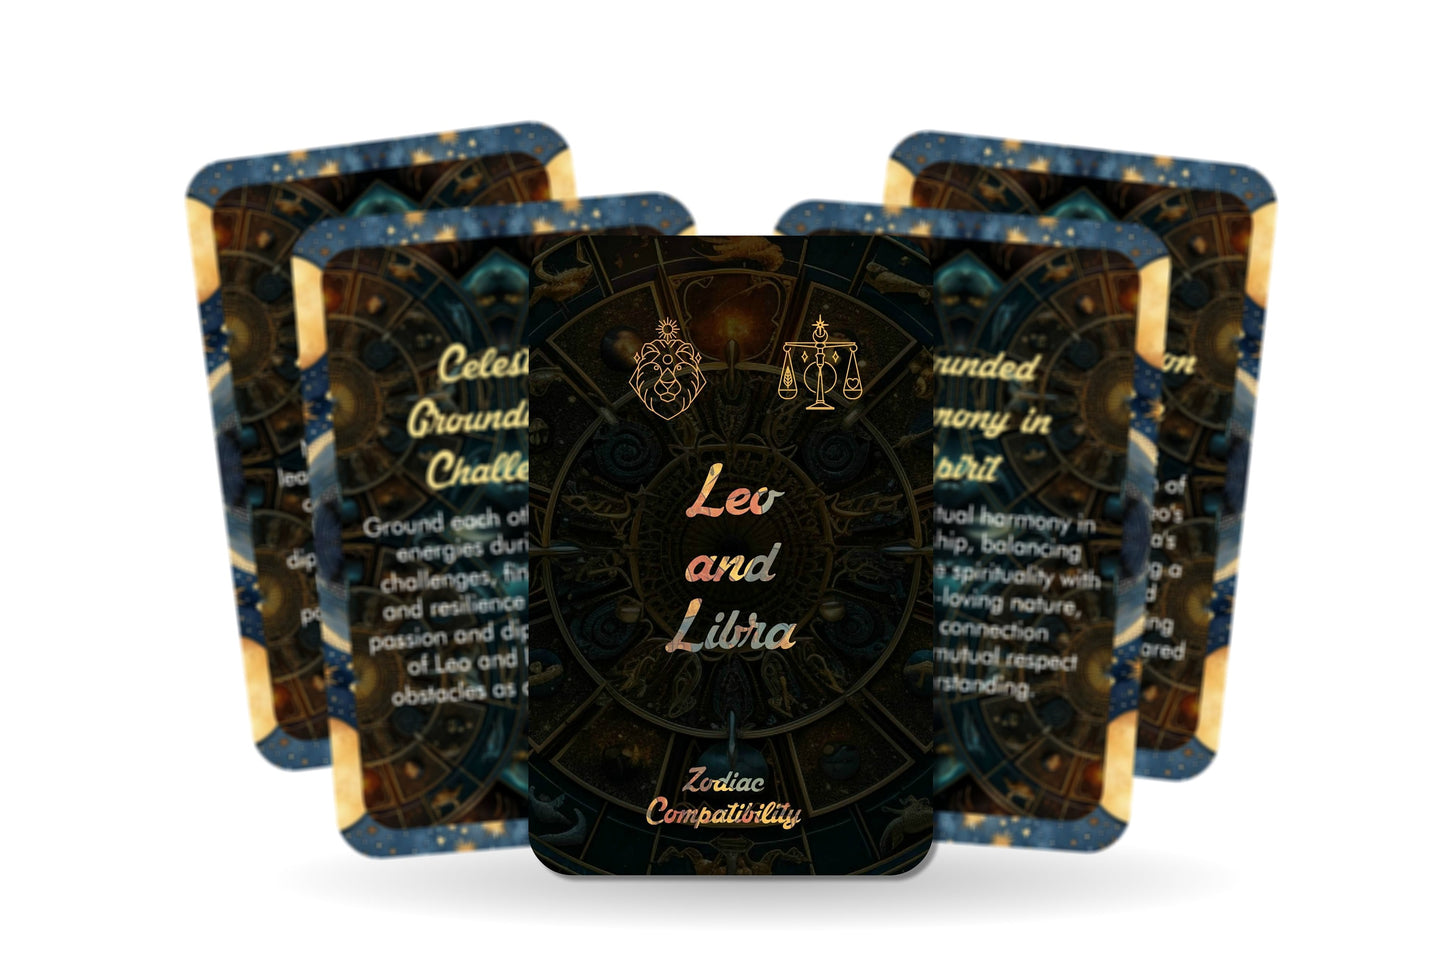 Leo and Libra - Zodiac Compatibility - Divination tools - Oracle cards - Star Sign Compatibility - Horoscope Compatibility Cards